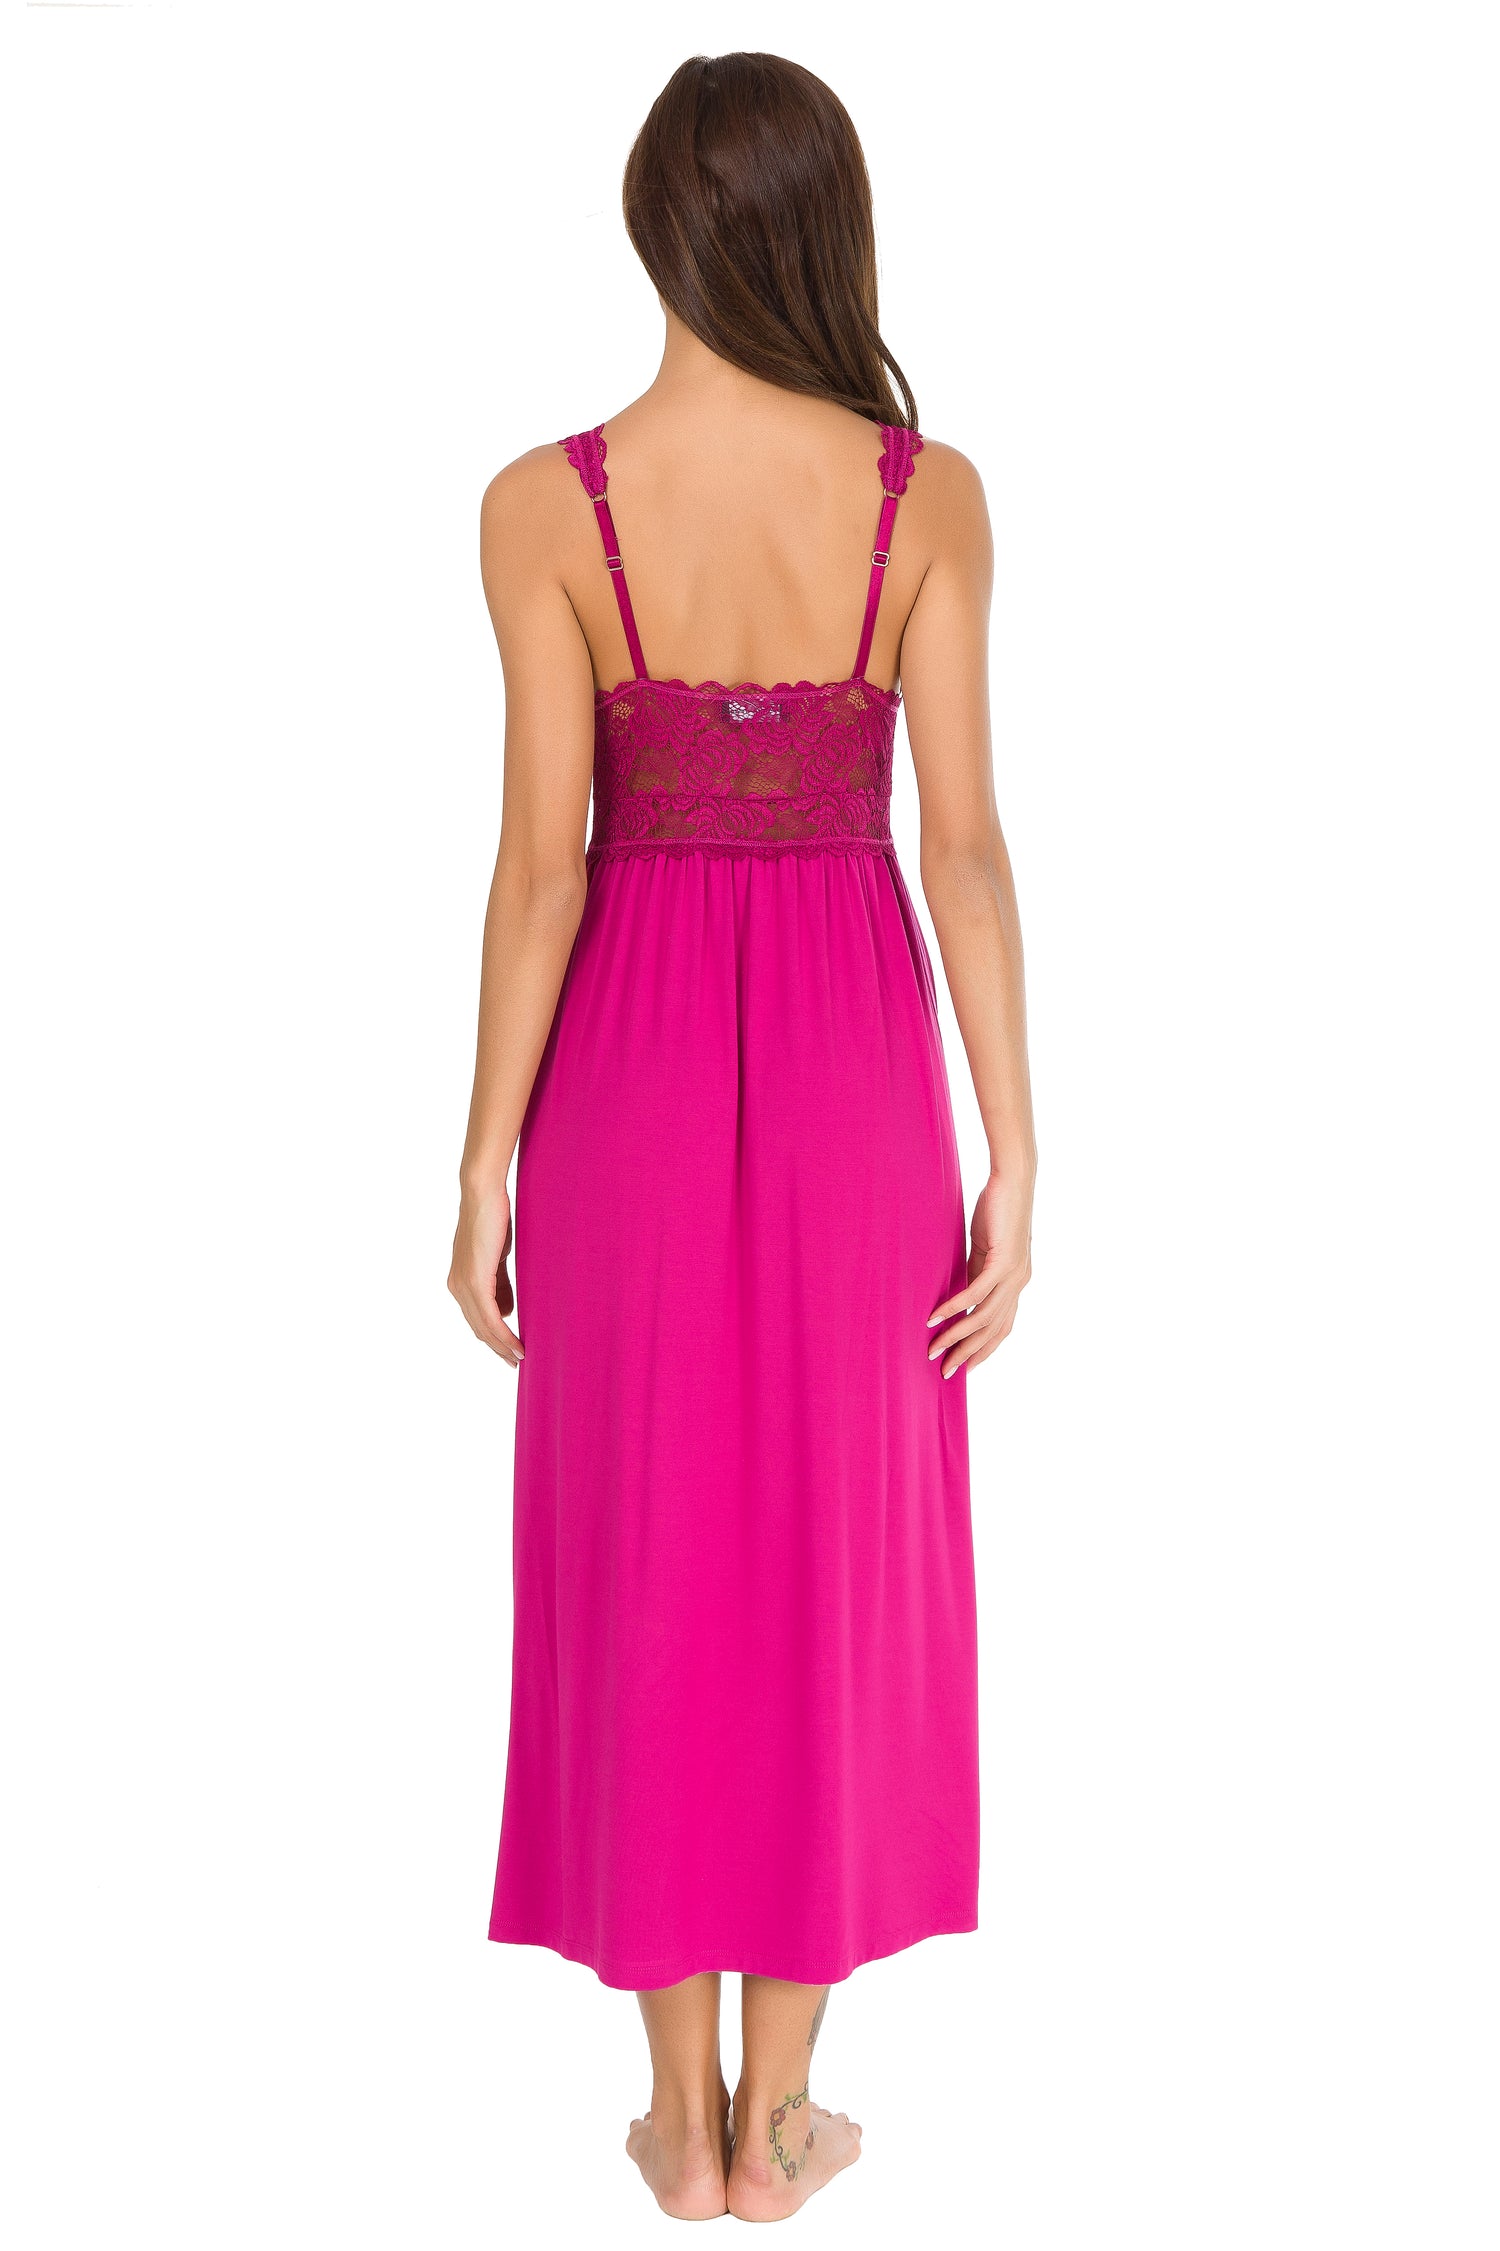 Sexy Lace Jersey Elegant Long Nightgown Chemises Rose